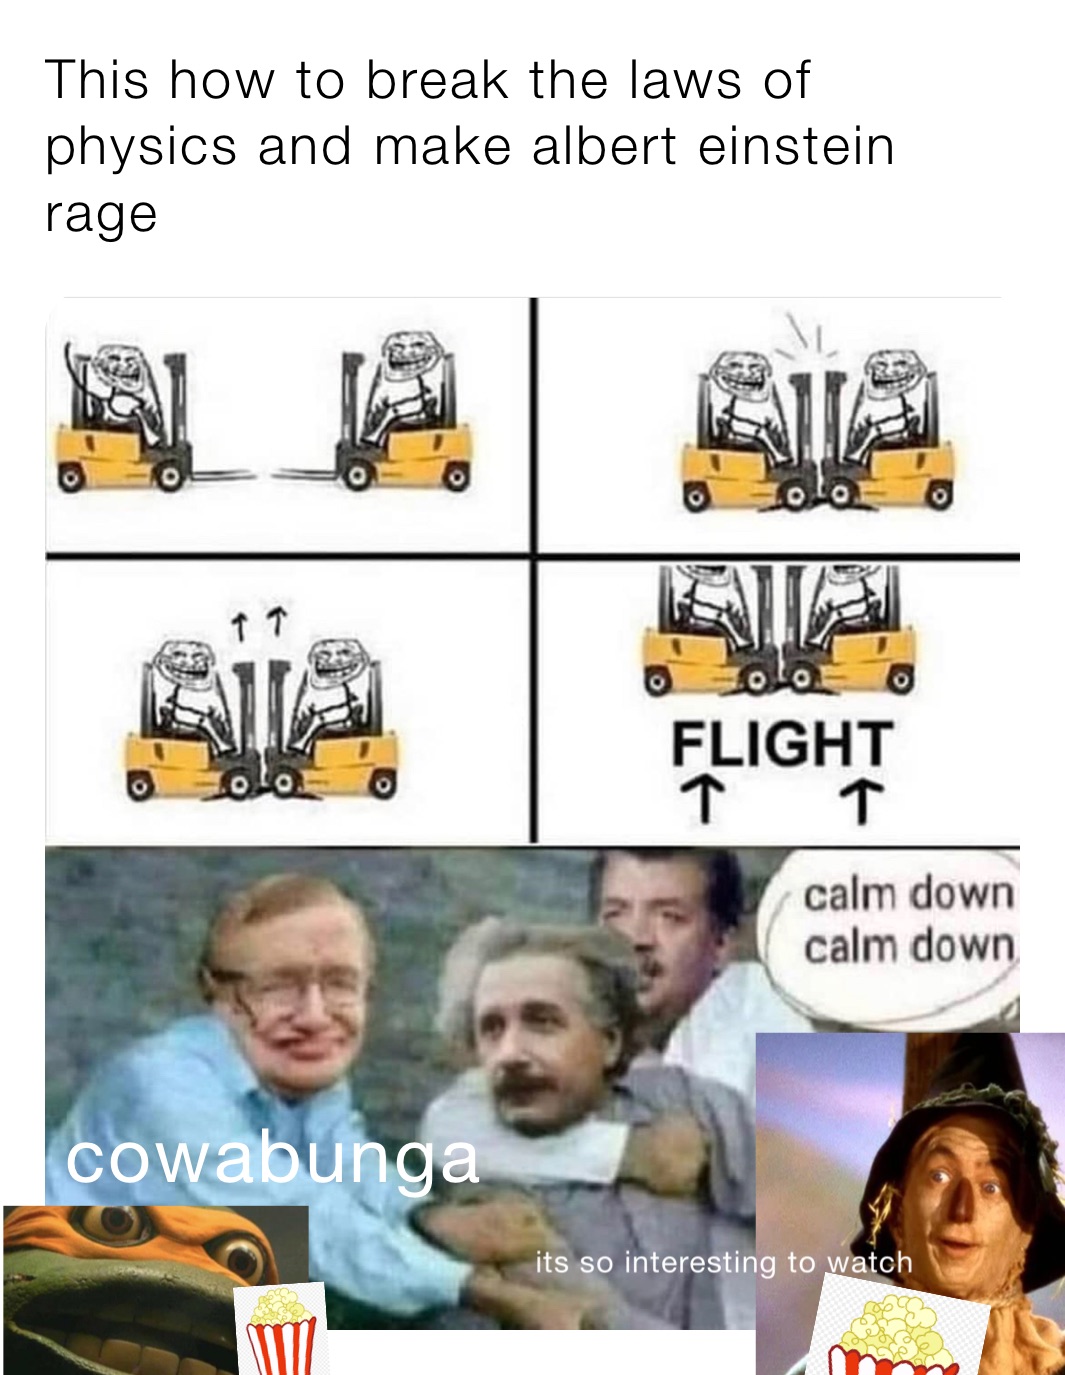 This how to break the laws of physics and make albert einstein rage